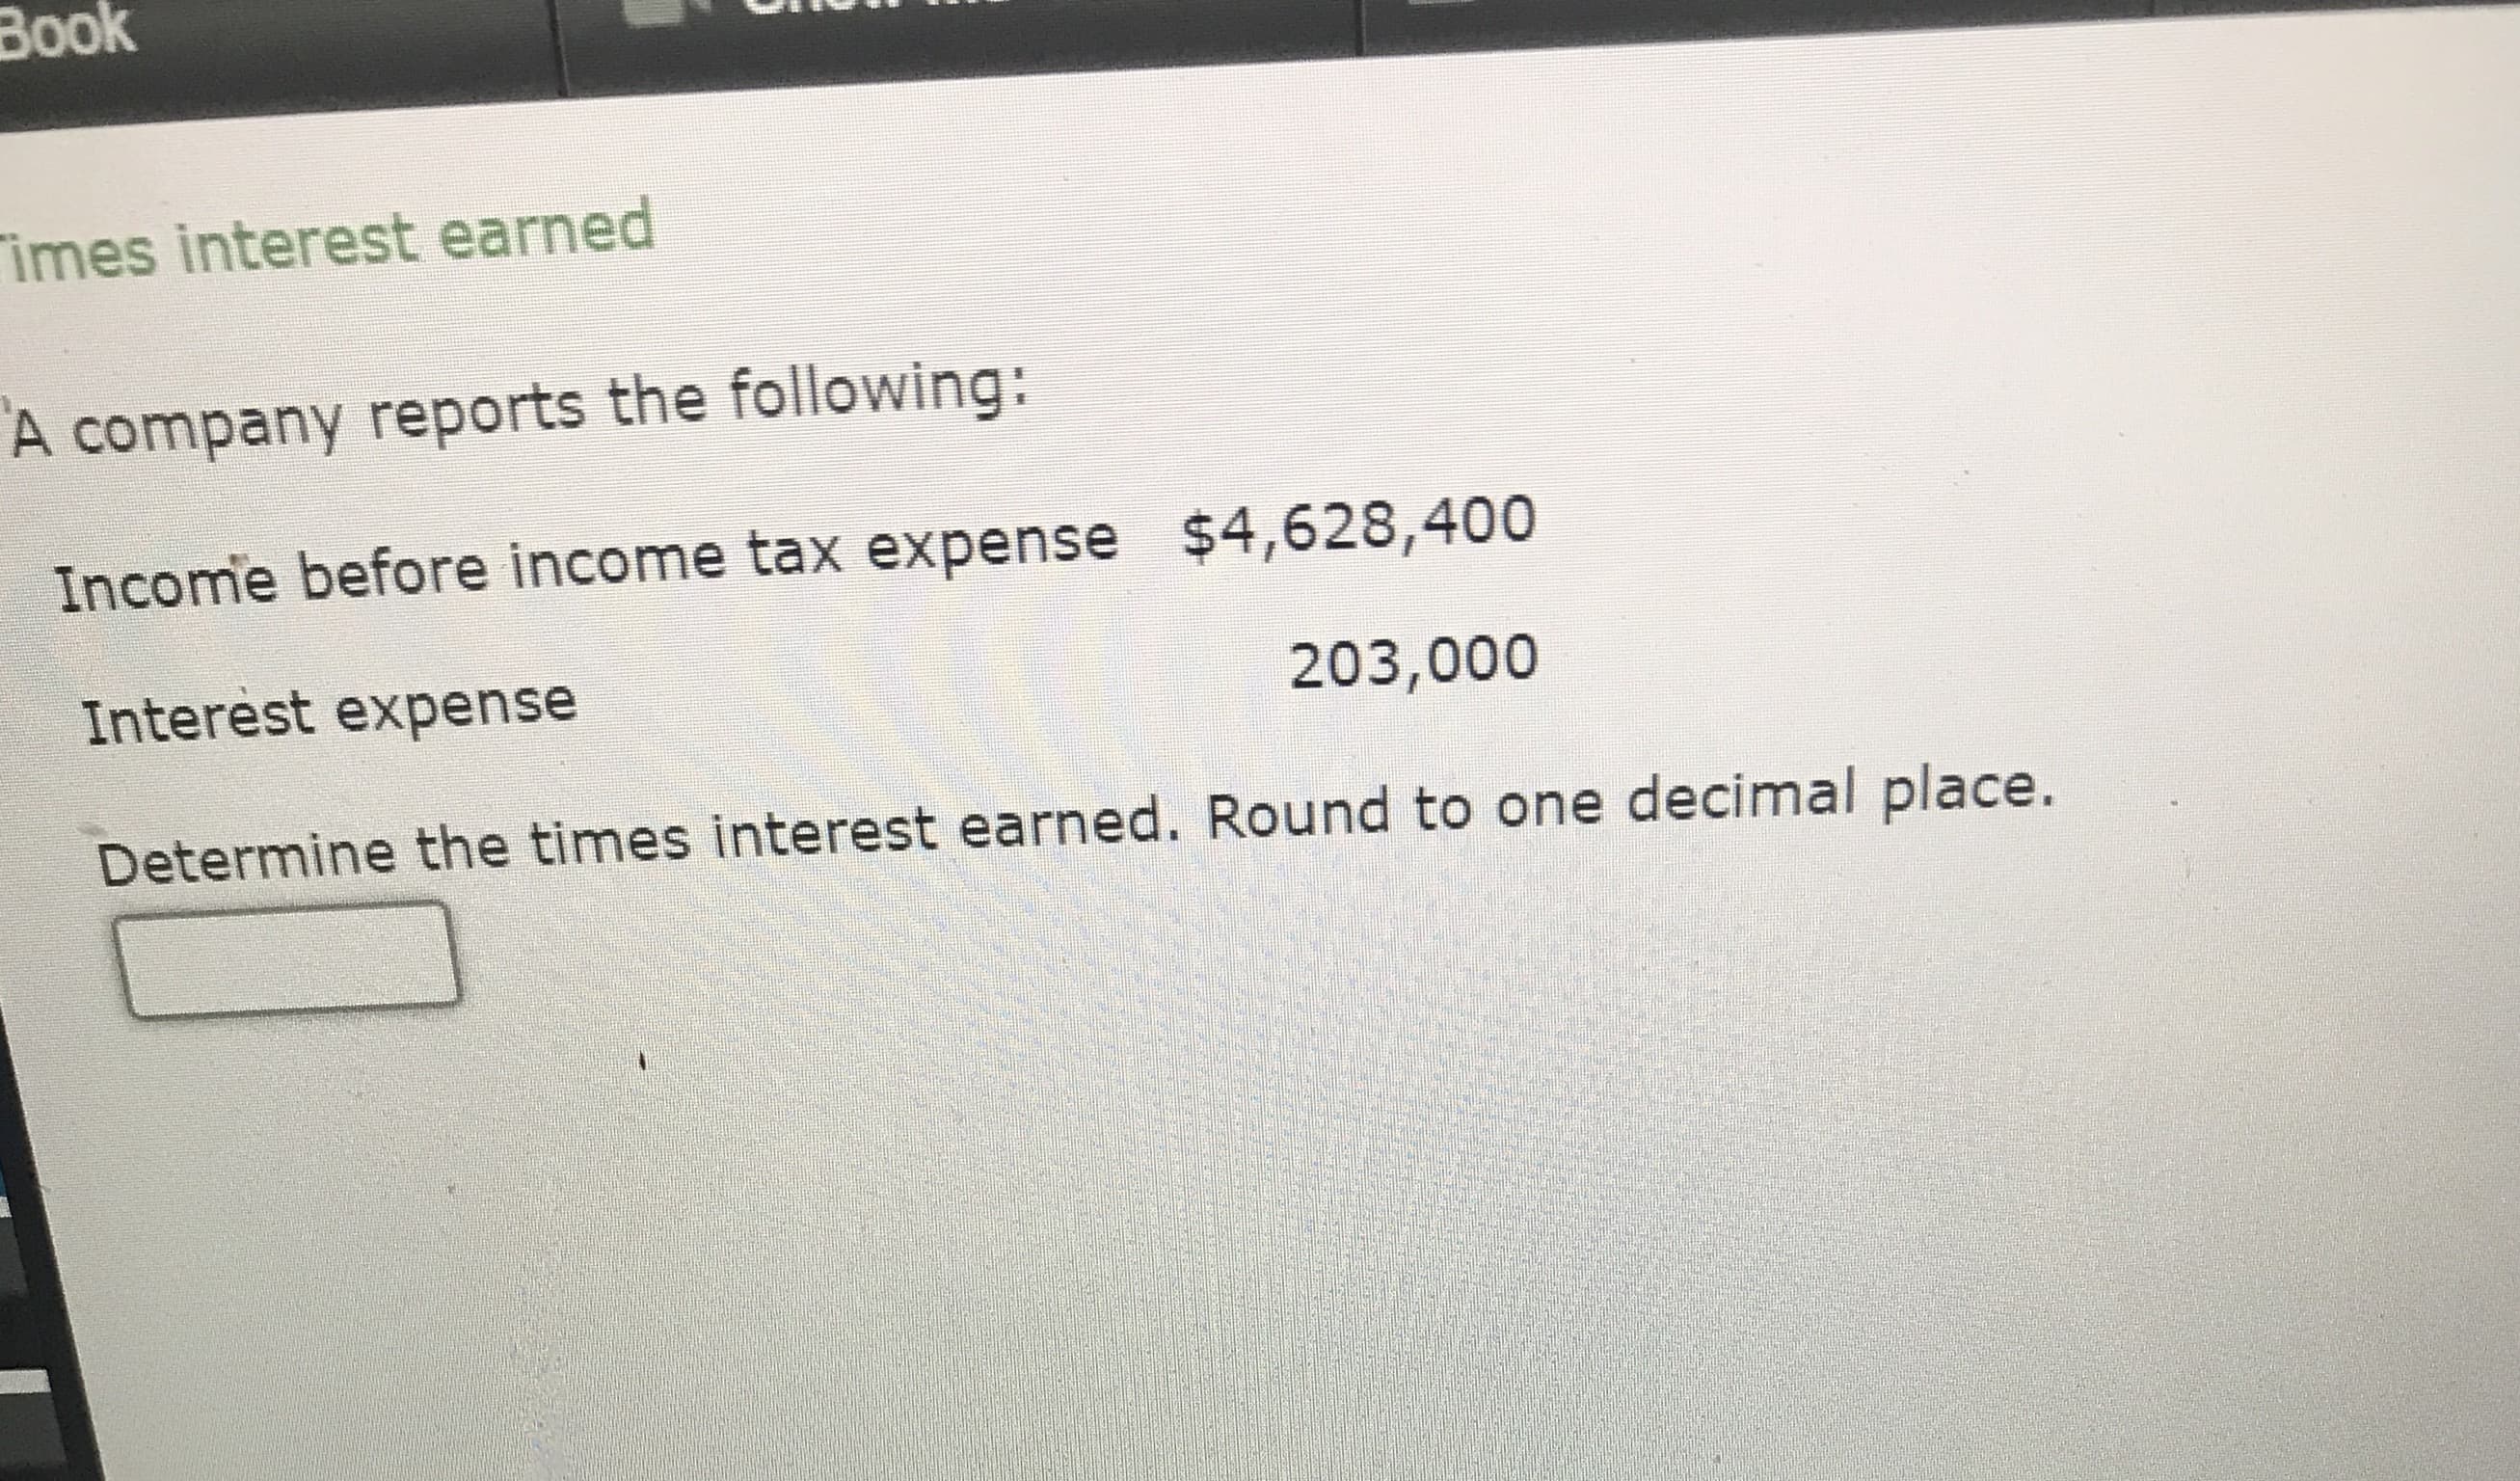 imes interest earned
A company reports the following:
Income before income tax expense $4,628,400
Interest expense
203,000
Determine the times interest earned. Round to one decimal place.
